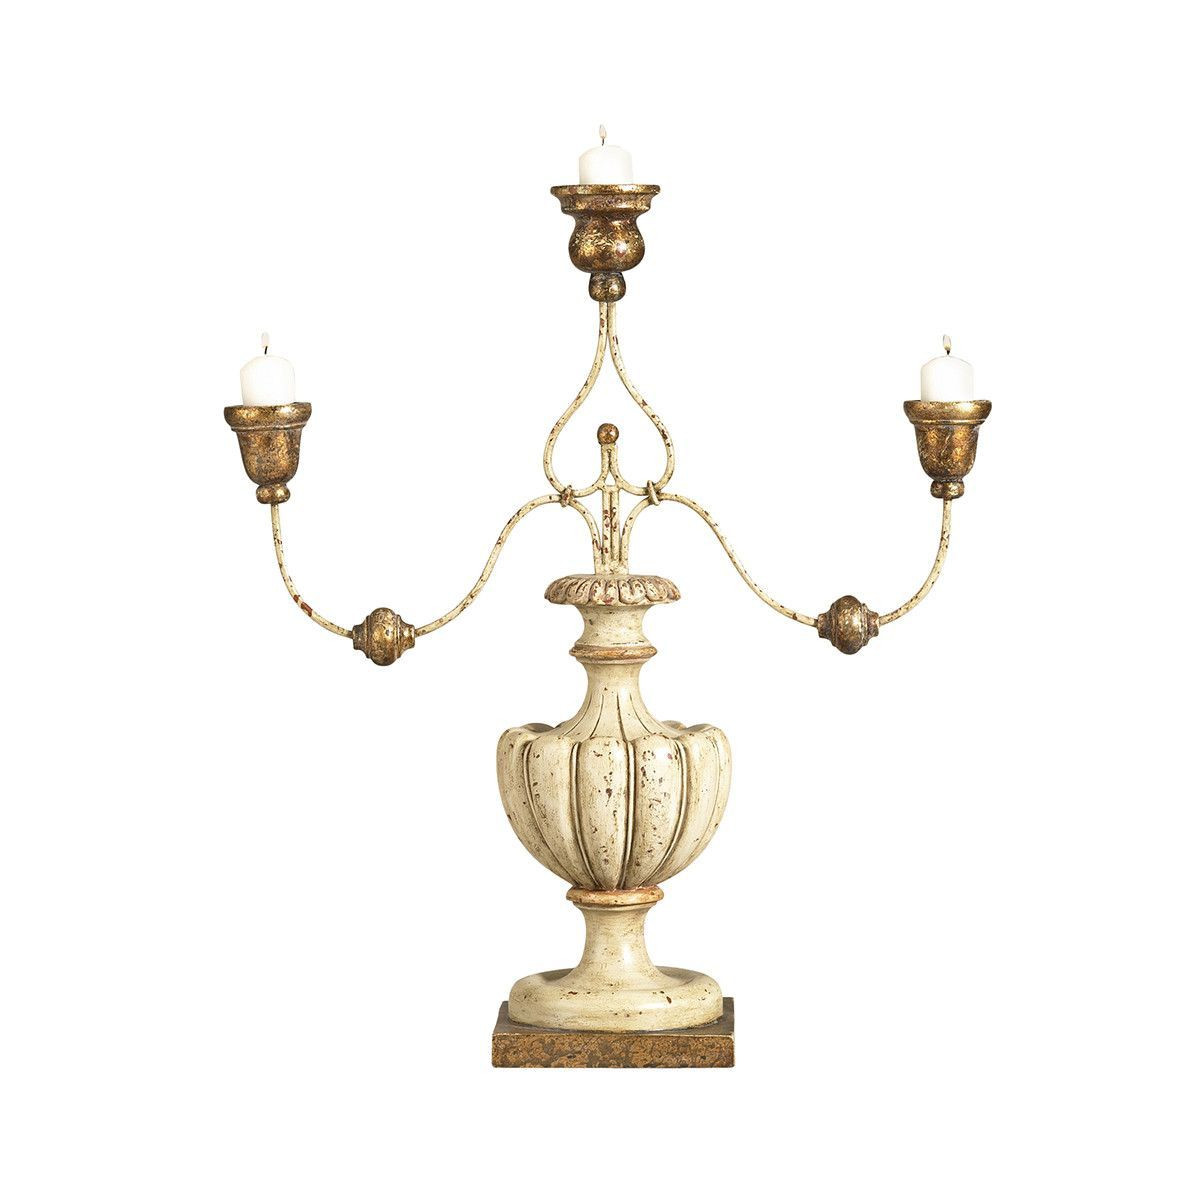 27 Perfect Chelsea House Vase 2024 free download chelsea house vase of chelsea house 40 0034 hargrove candelabra products house and chelsea in chelsea house 40 0034 hargrove candelabra